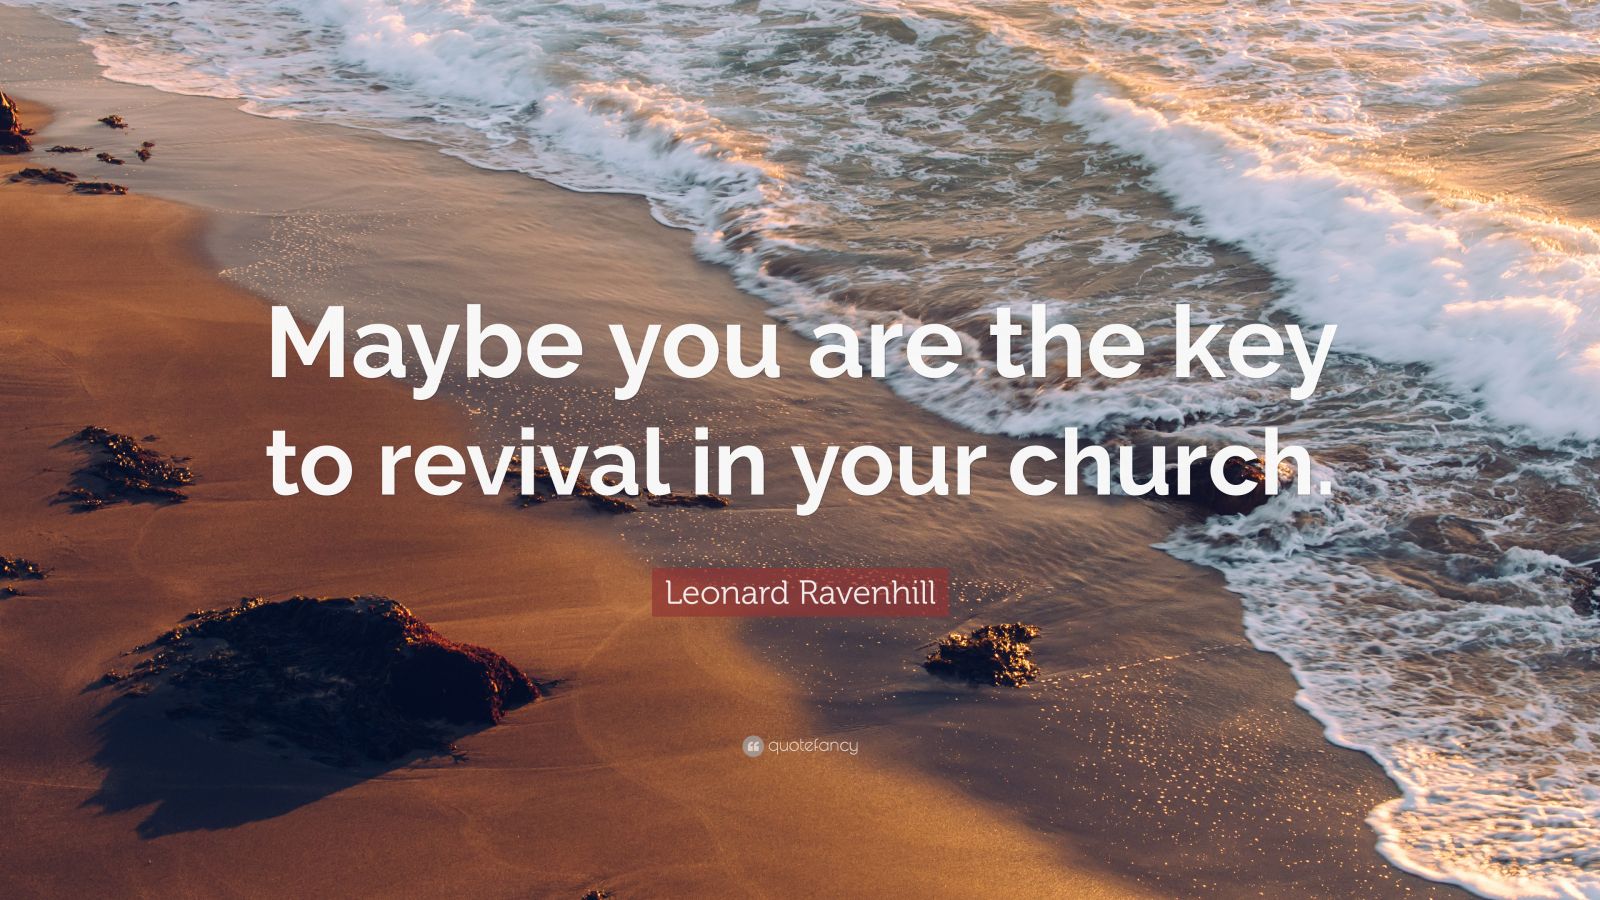 Leonard Ravenhill Quote “Maybe you are the key to revival in your